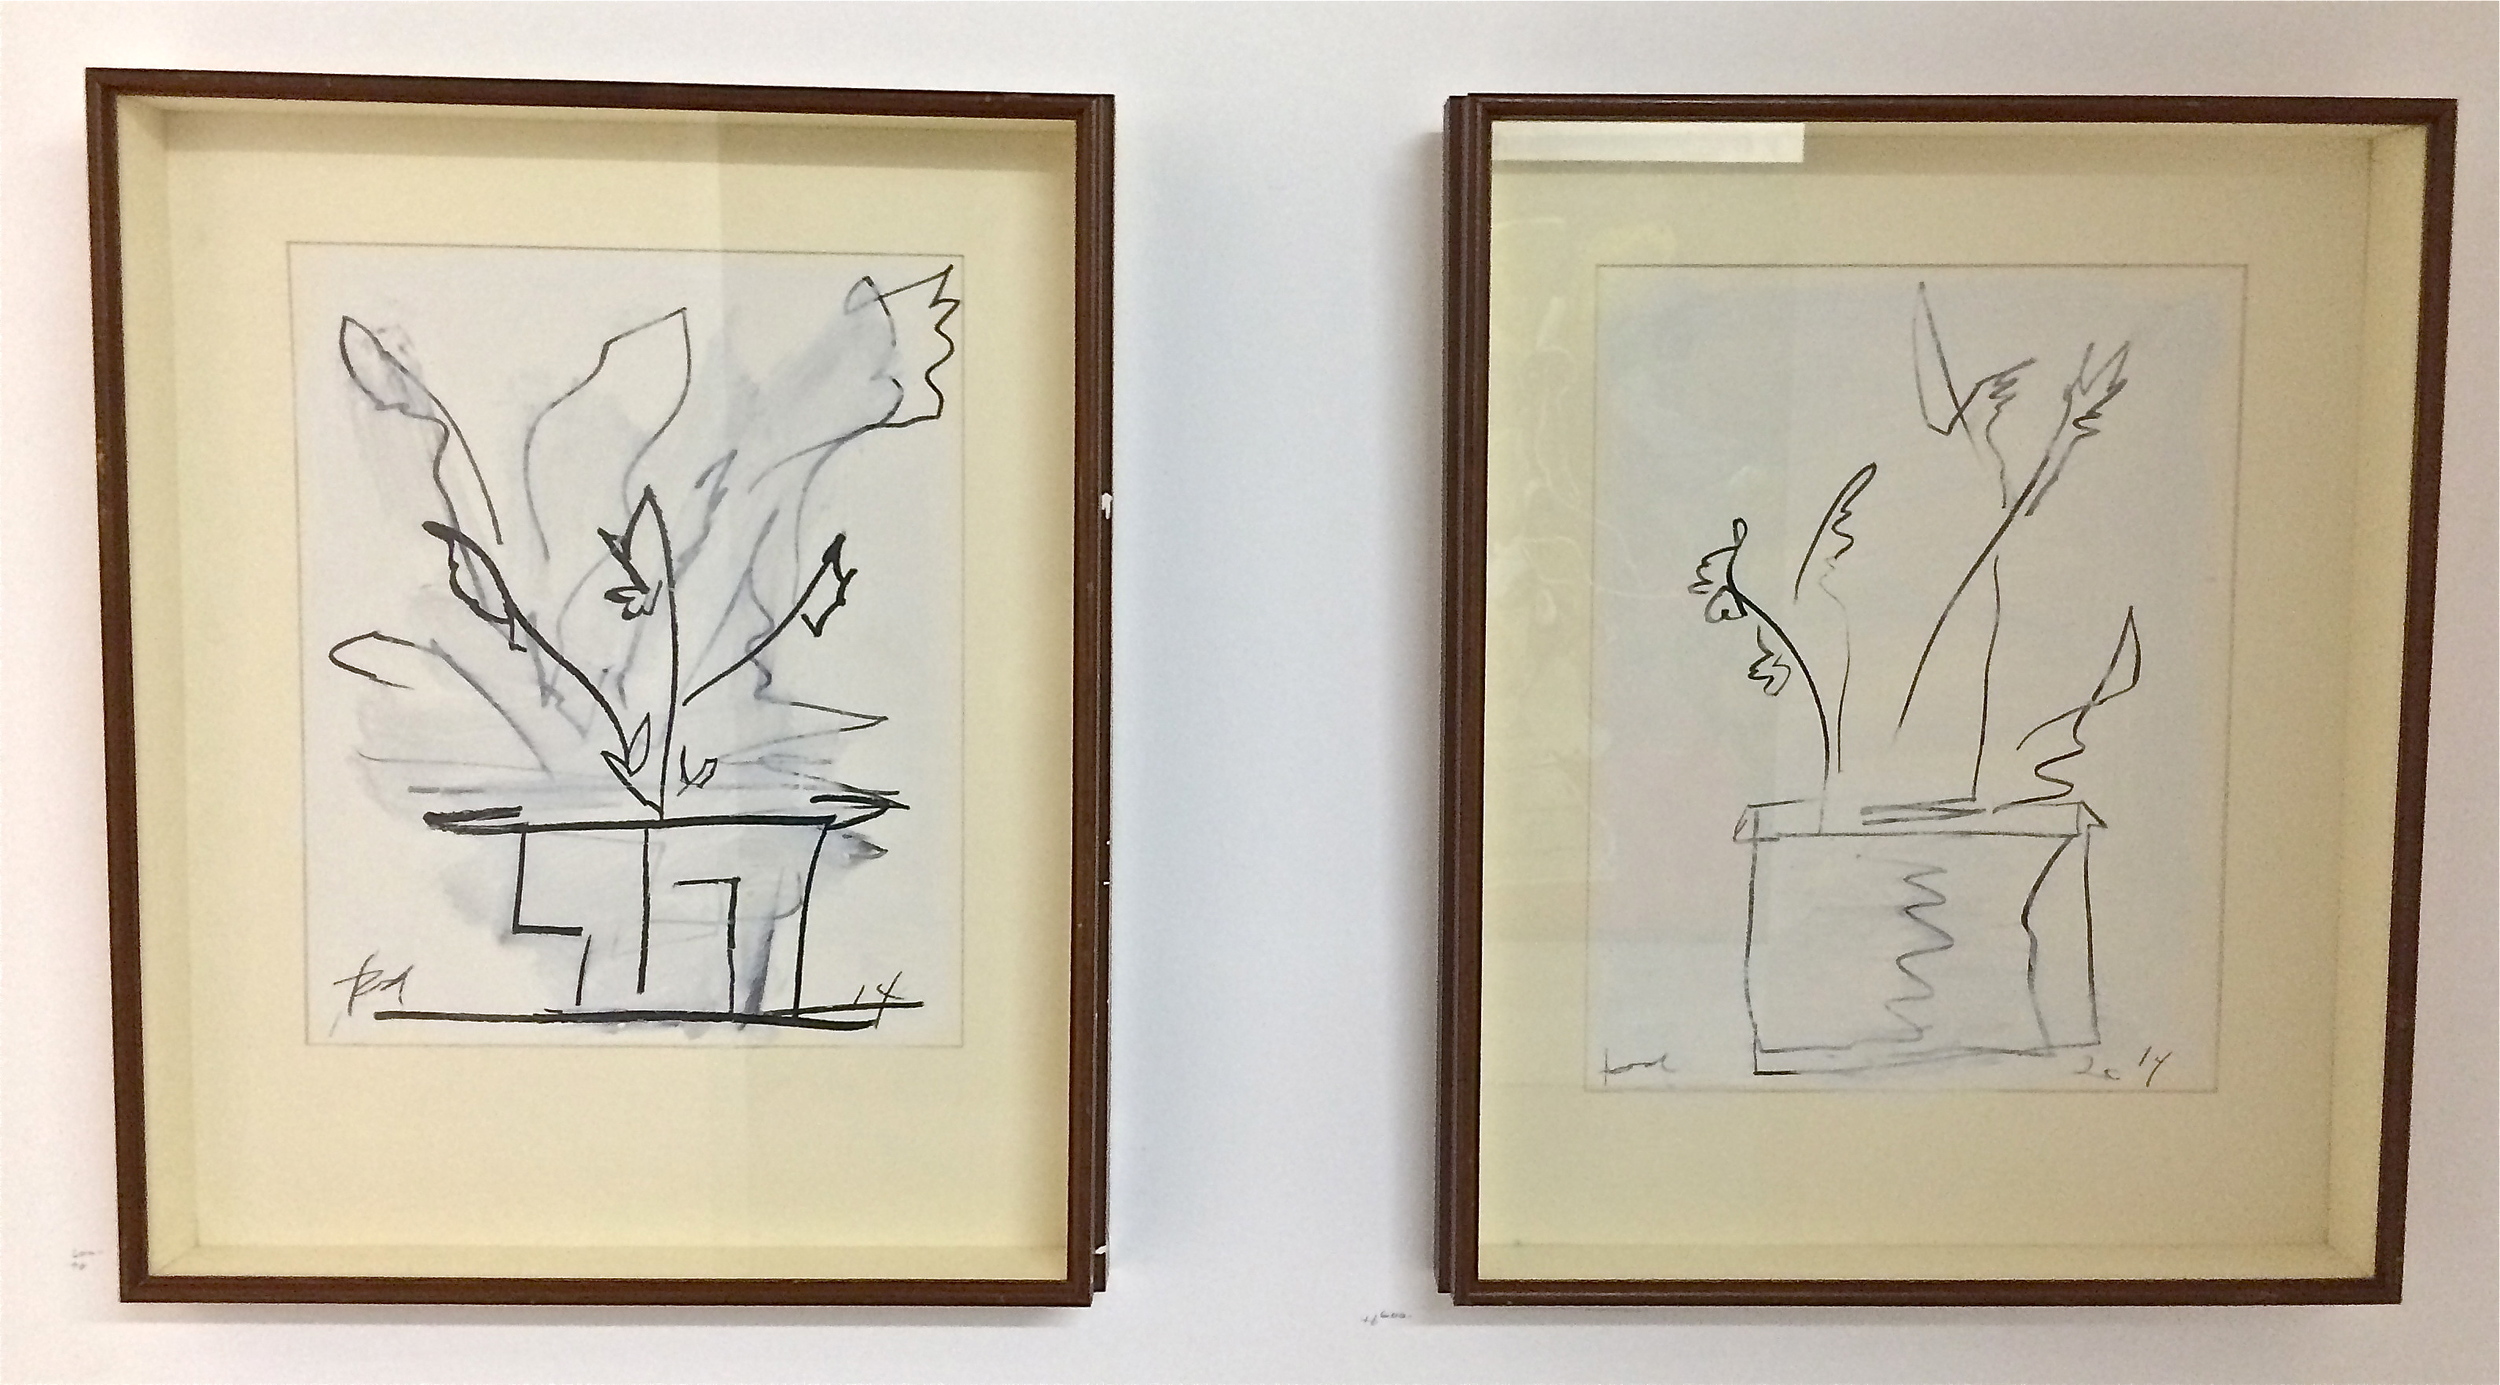 works on paper, 2014